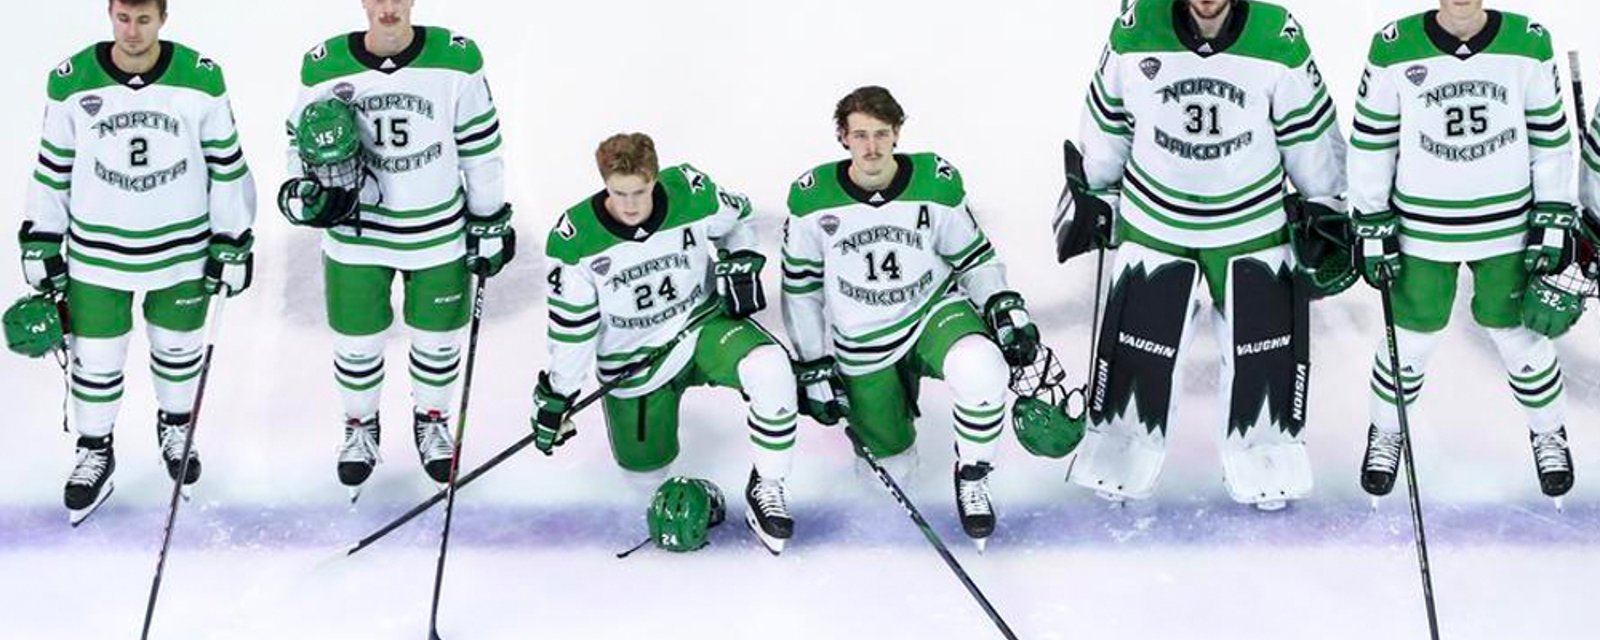 Top prospects Bernard-Docker and Weatherby kneel for the national anthem at UND season opener